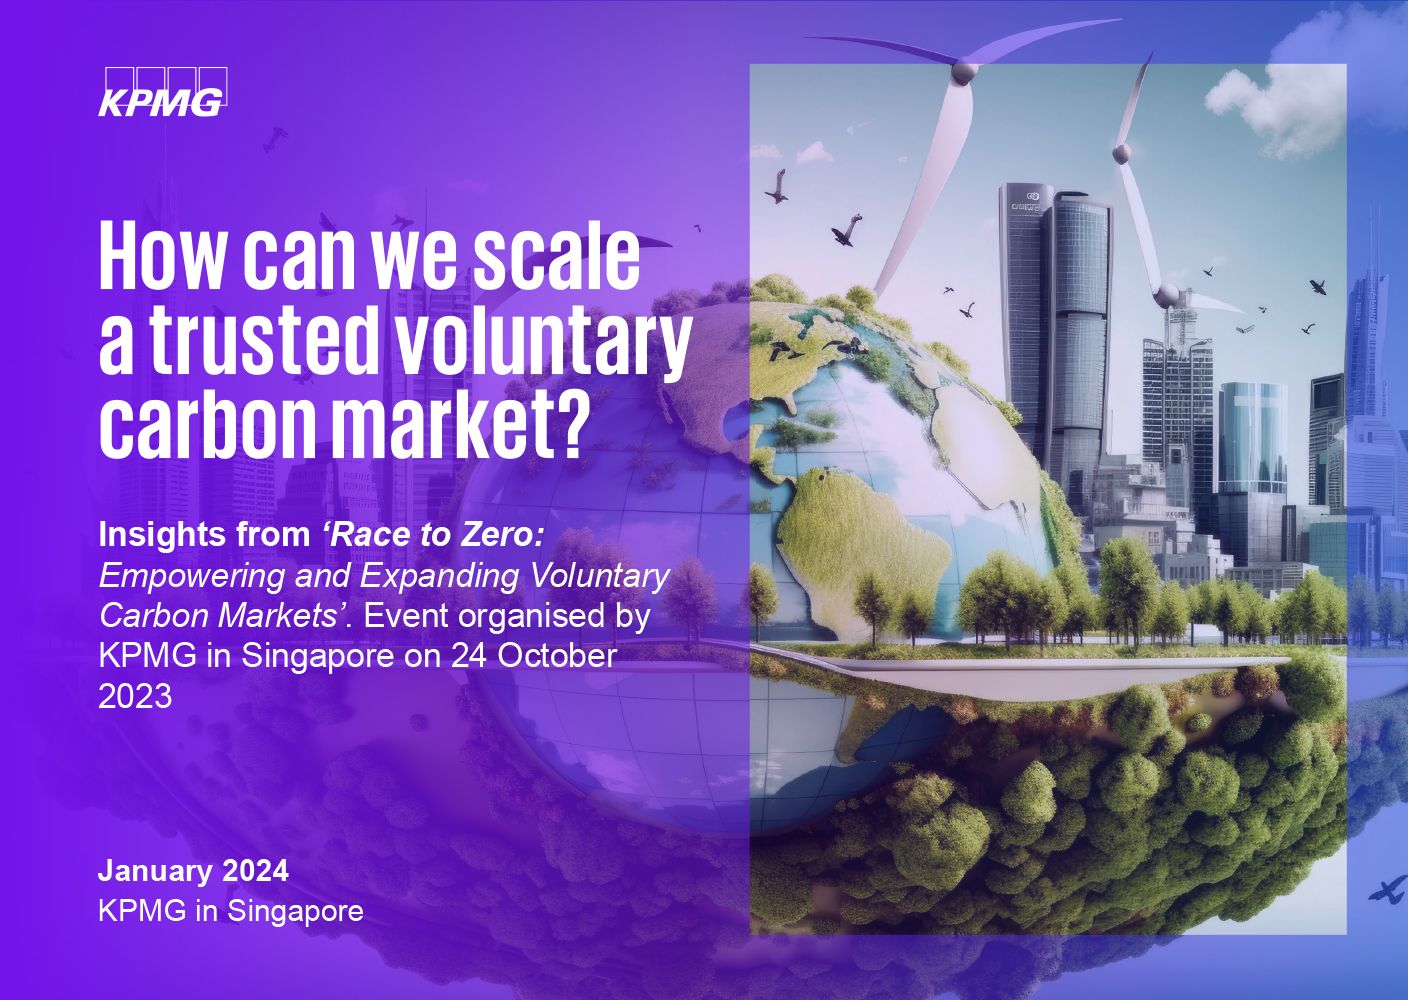 How can we scale a trusted voluntary carbon market